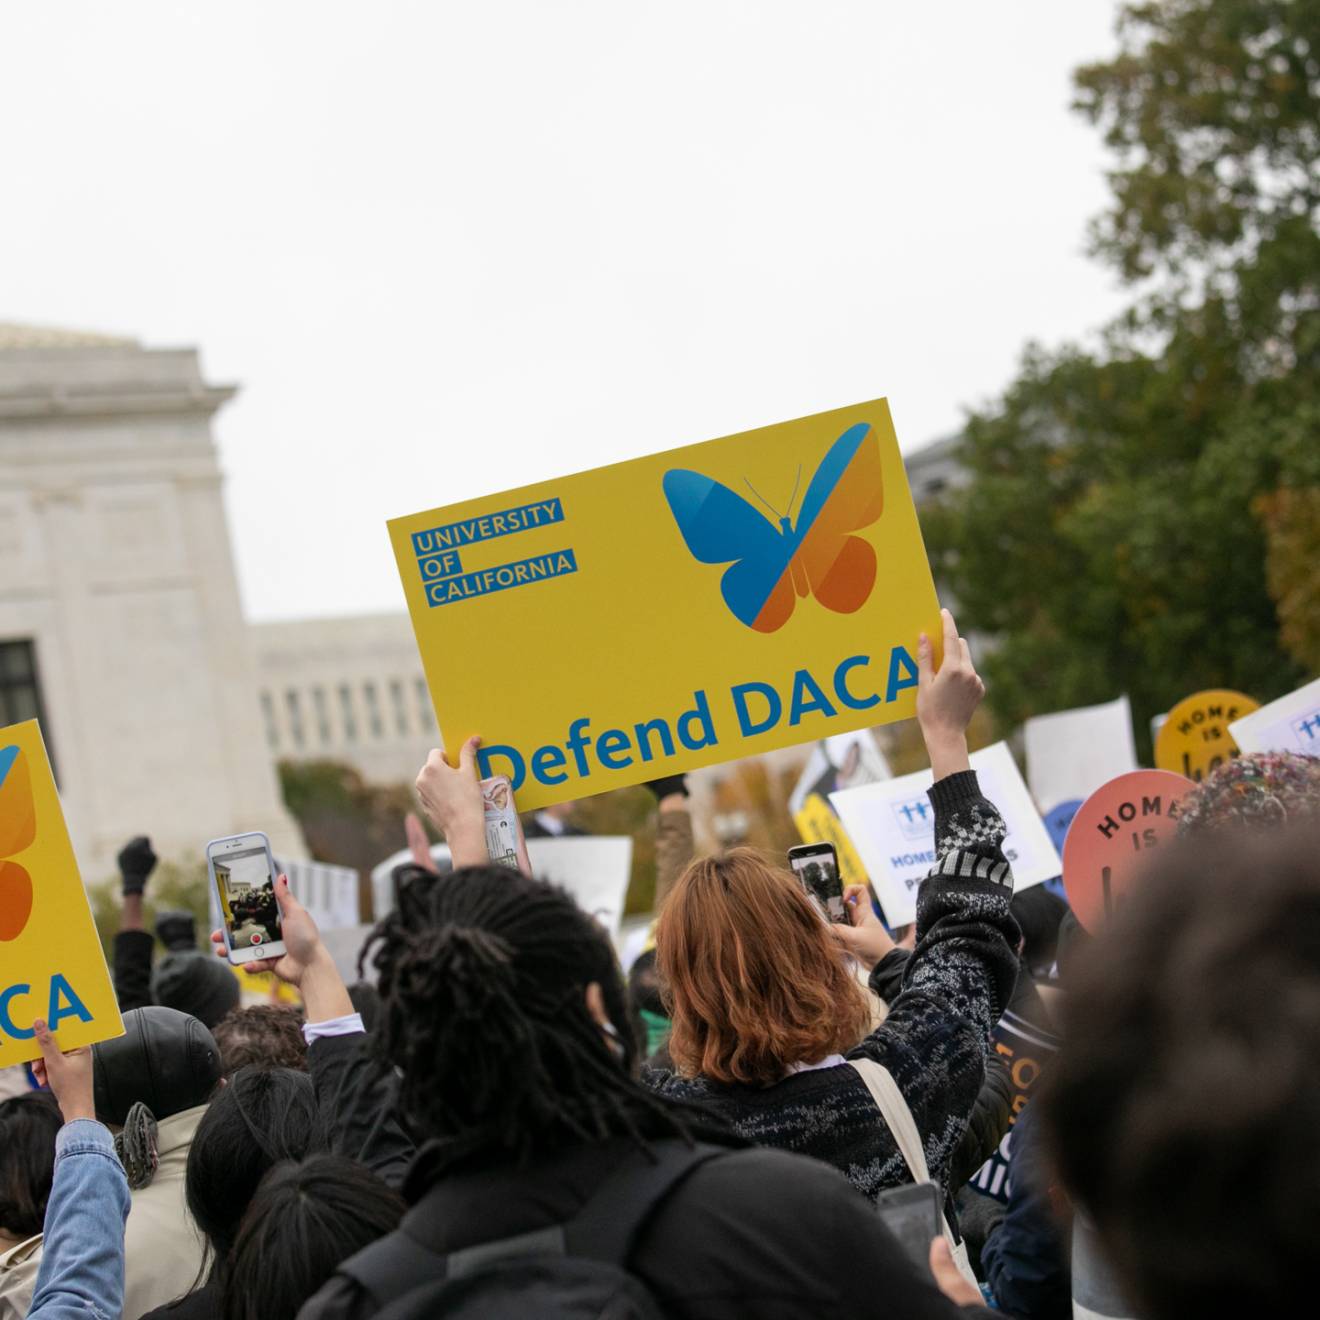 Defend DACA signs at a rally